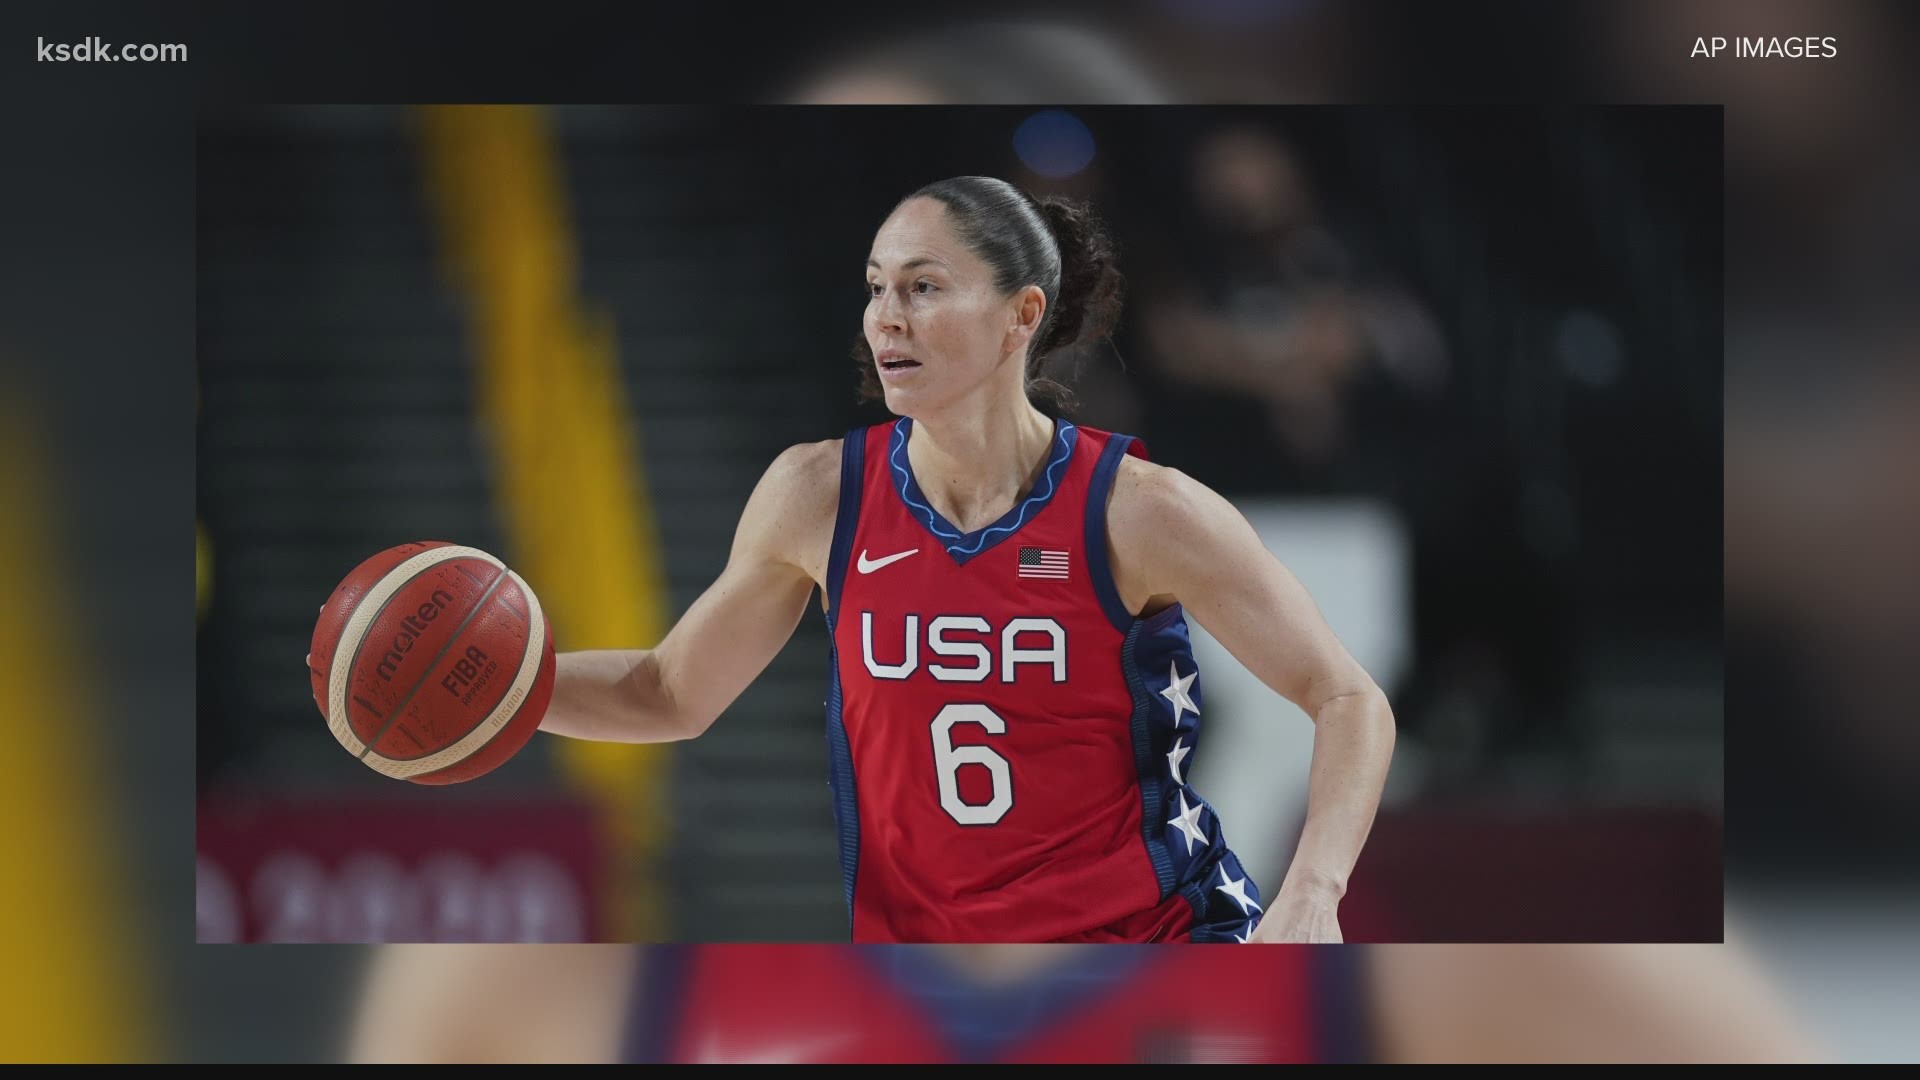 The U.S. women's basketball team is seeking its seventh consecutive gold medal